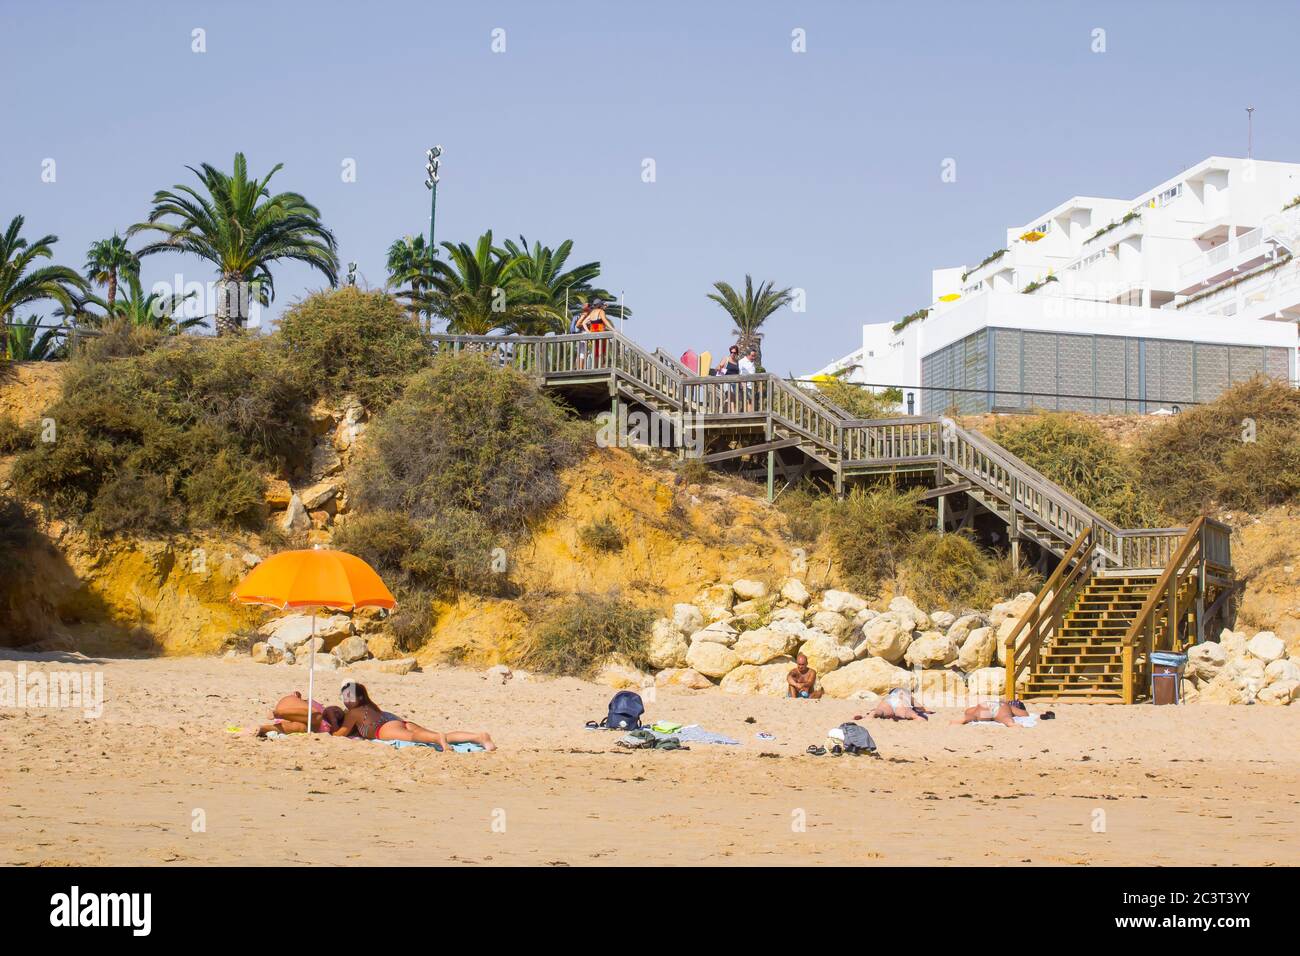 3 October 2018 A view along Oura Praia Beach in Albuferia Portugal on the Algarve with its hotels sun beds sand and holidaymakers Stock Photo